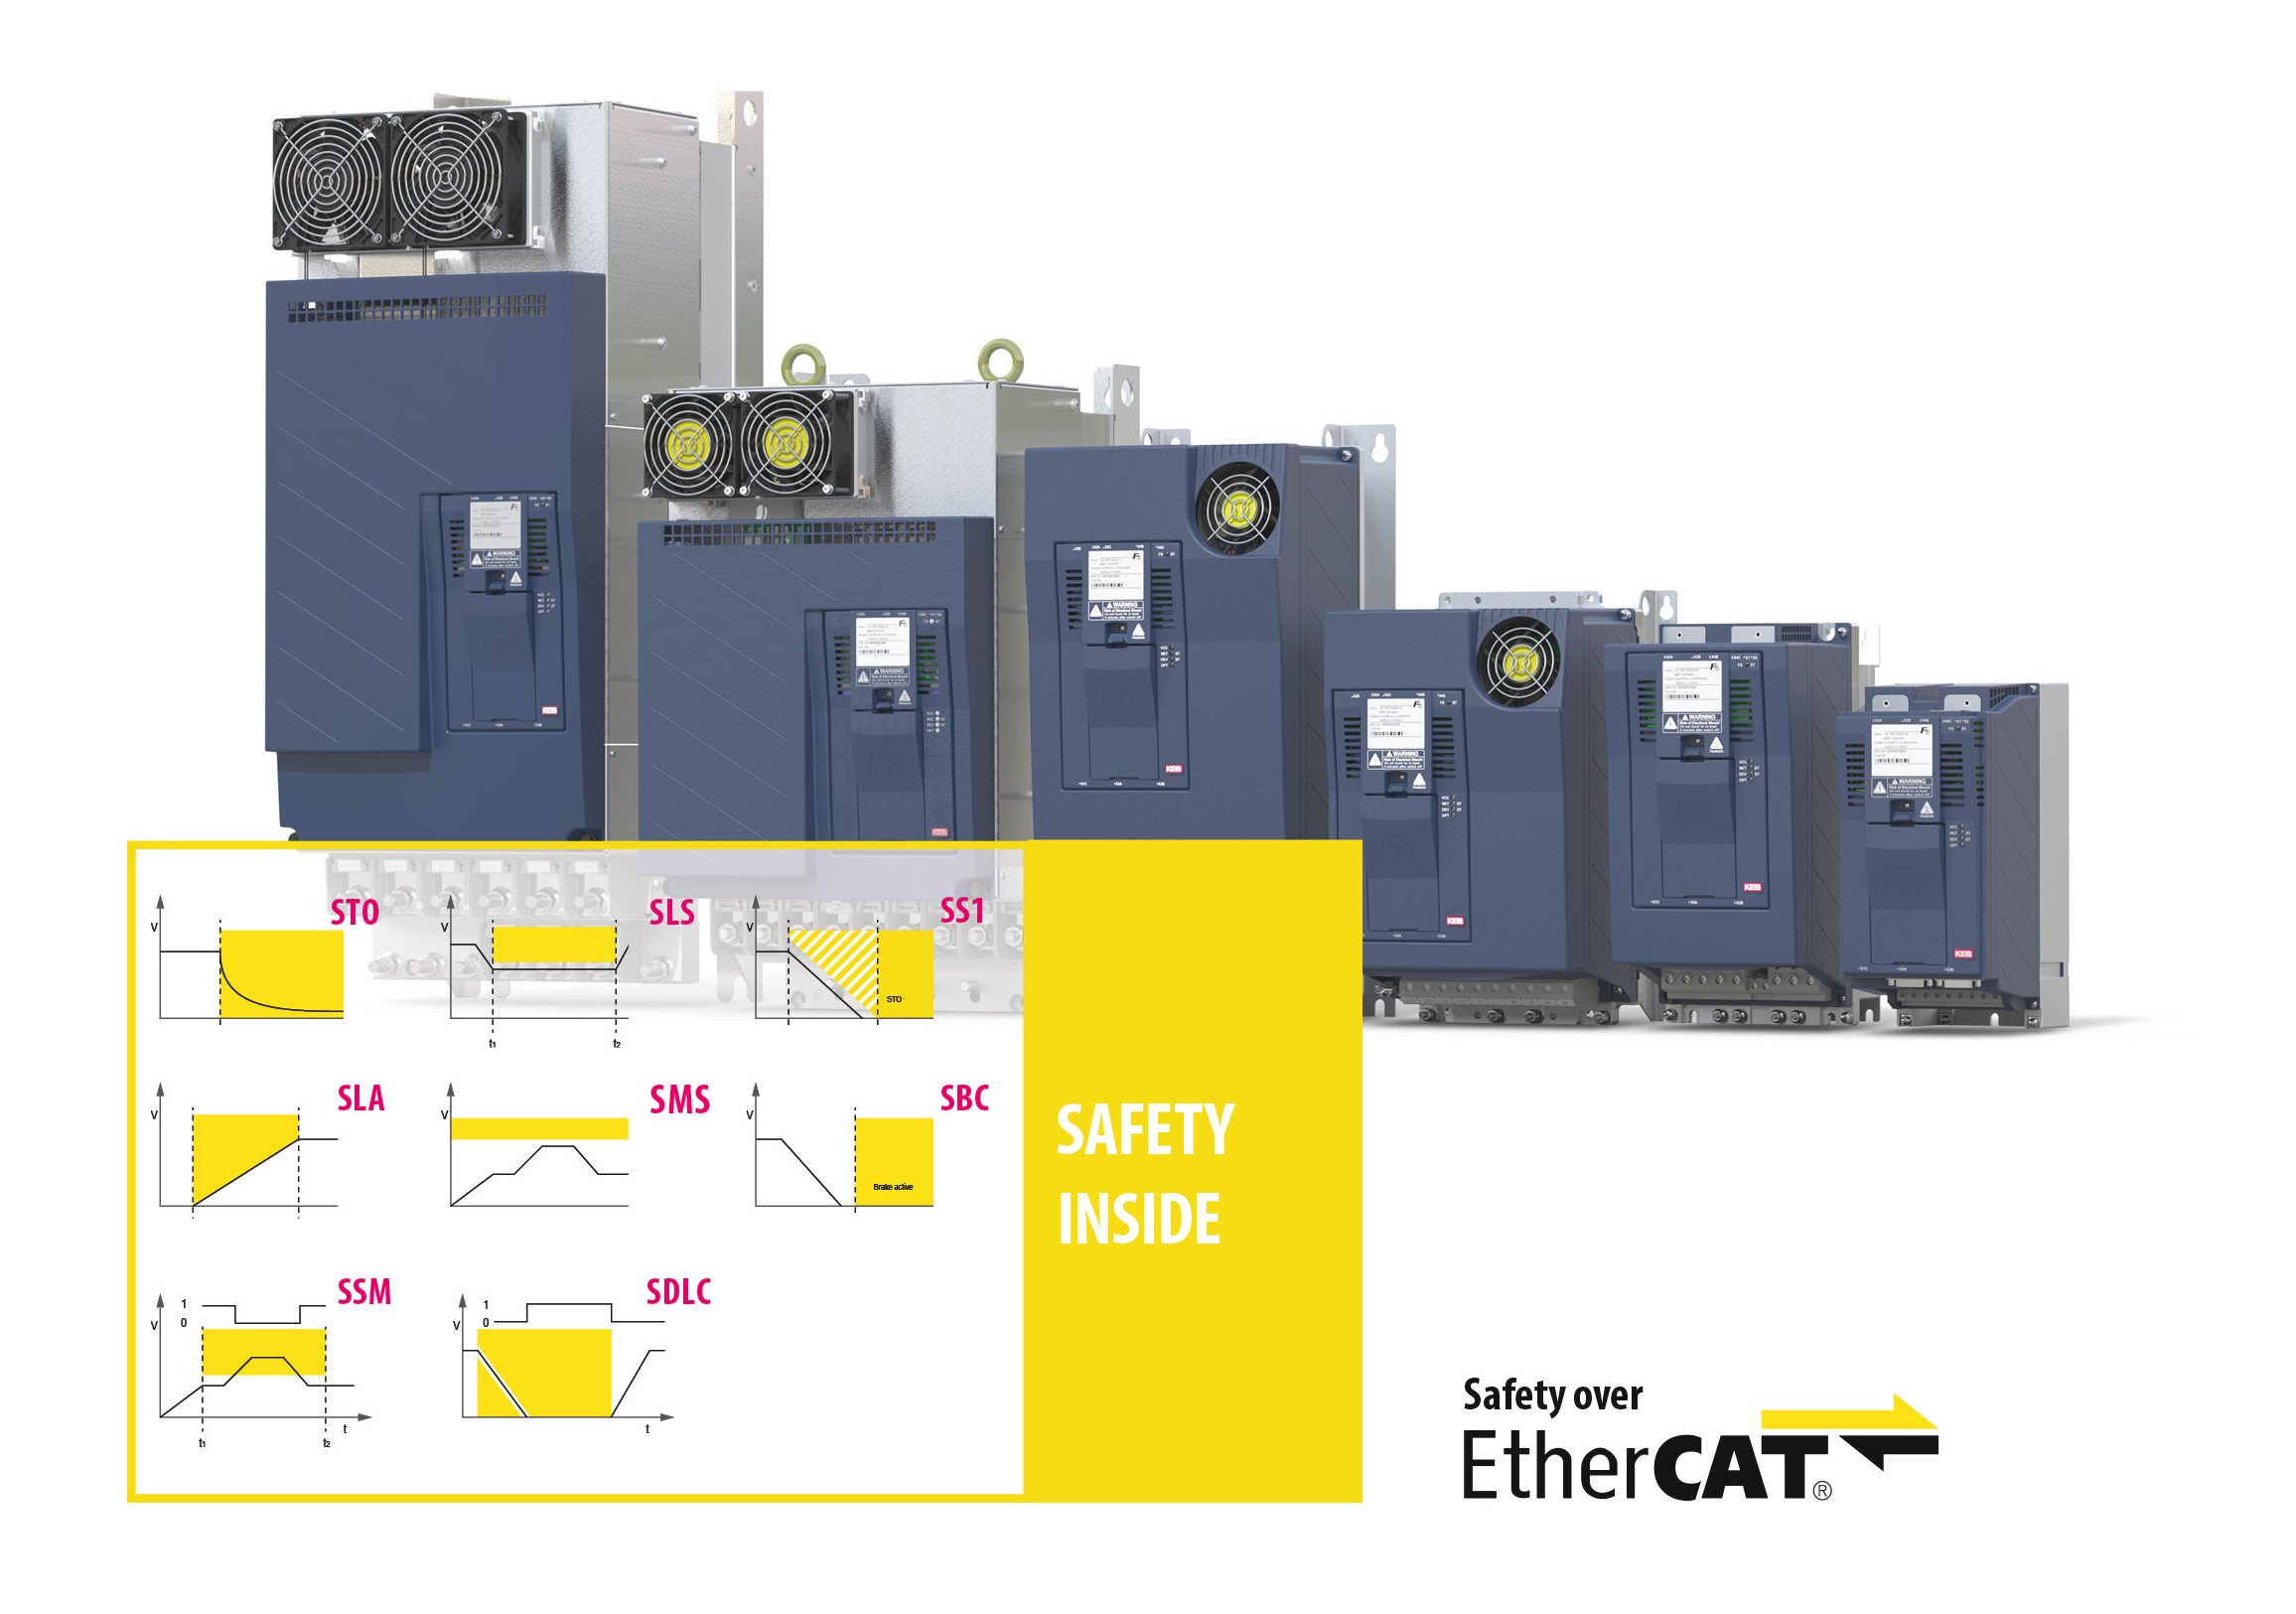 Drive KEB generazione 6 safety inside; Safety over Ethercat